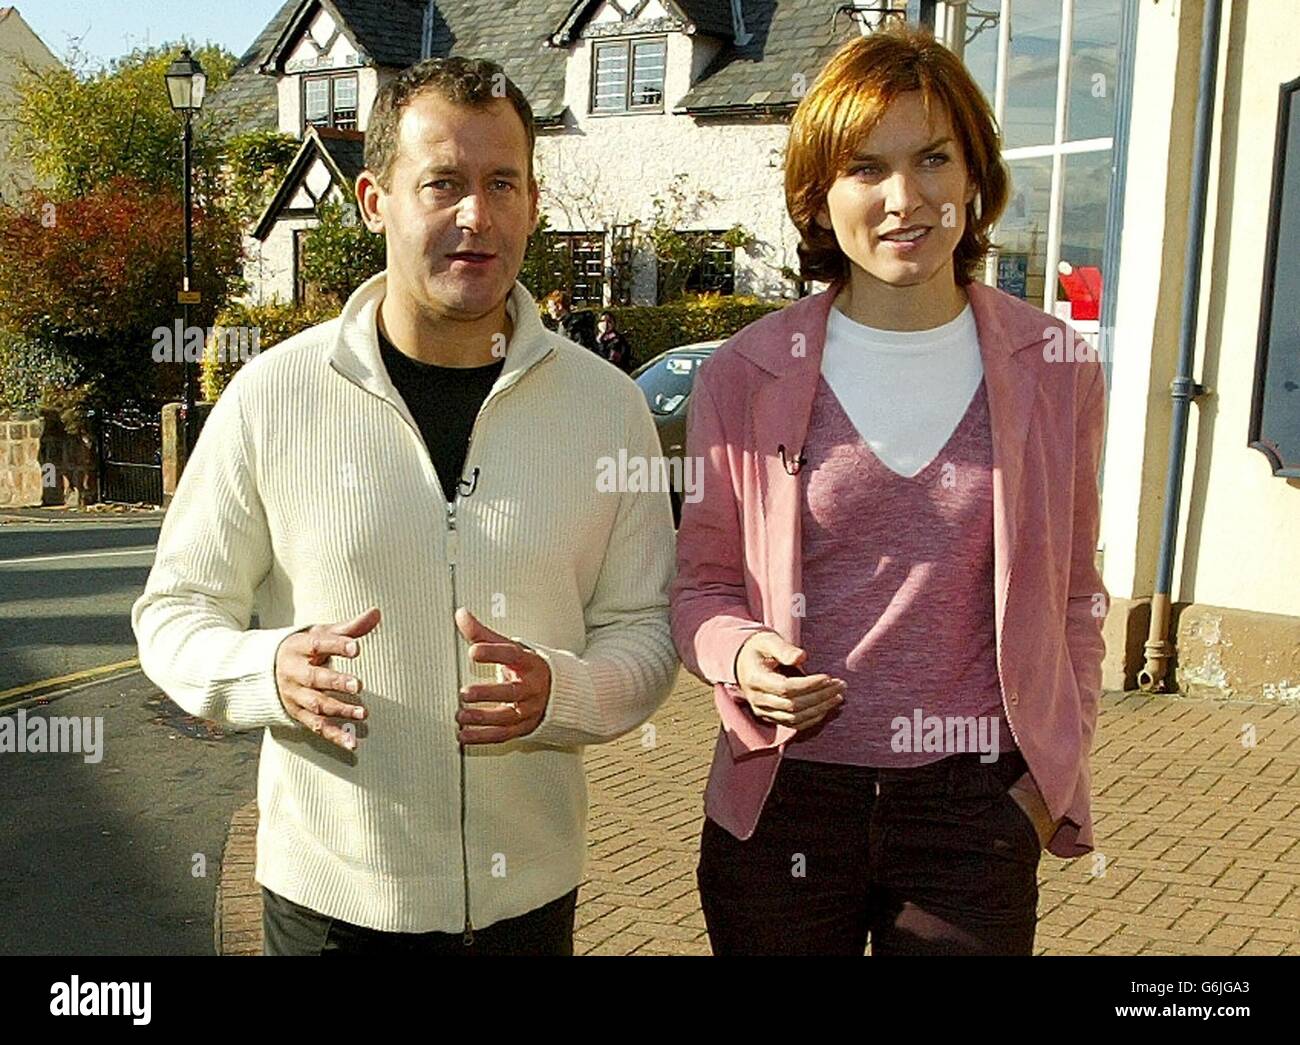 Paul Burrell, former butler to Diana, Princess of Wales arrives at his home in Farndon, Cheshire, accompanied by television journalist Fiona Bruce. Mr Burrell has been heavily criticised by members of the Royal Family following the release of extracts from his forthcoming book A Royal Duty. Stock Photo